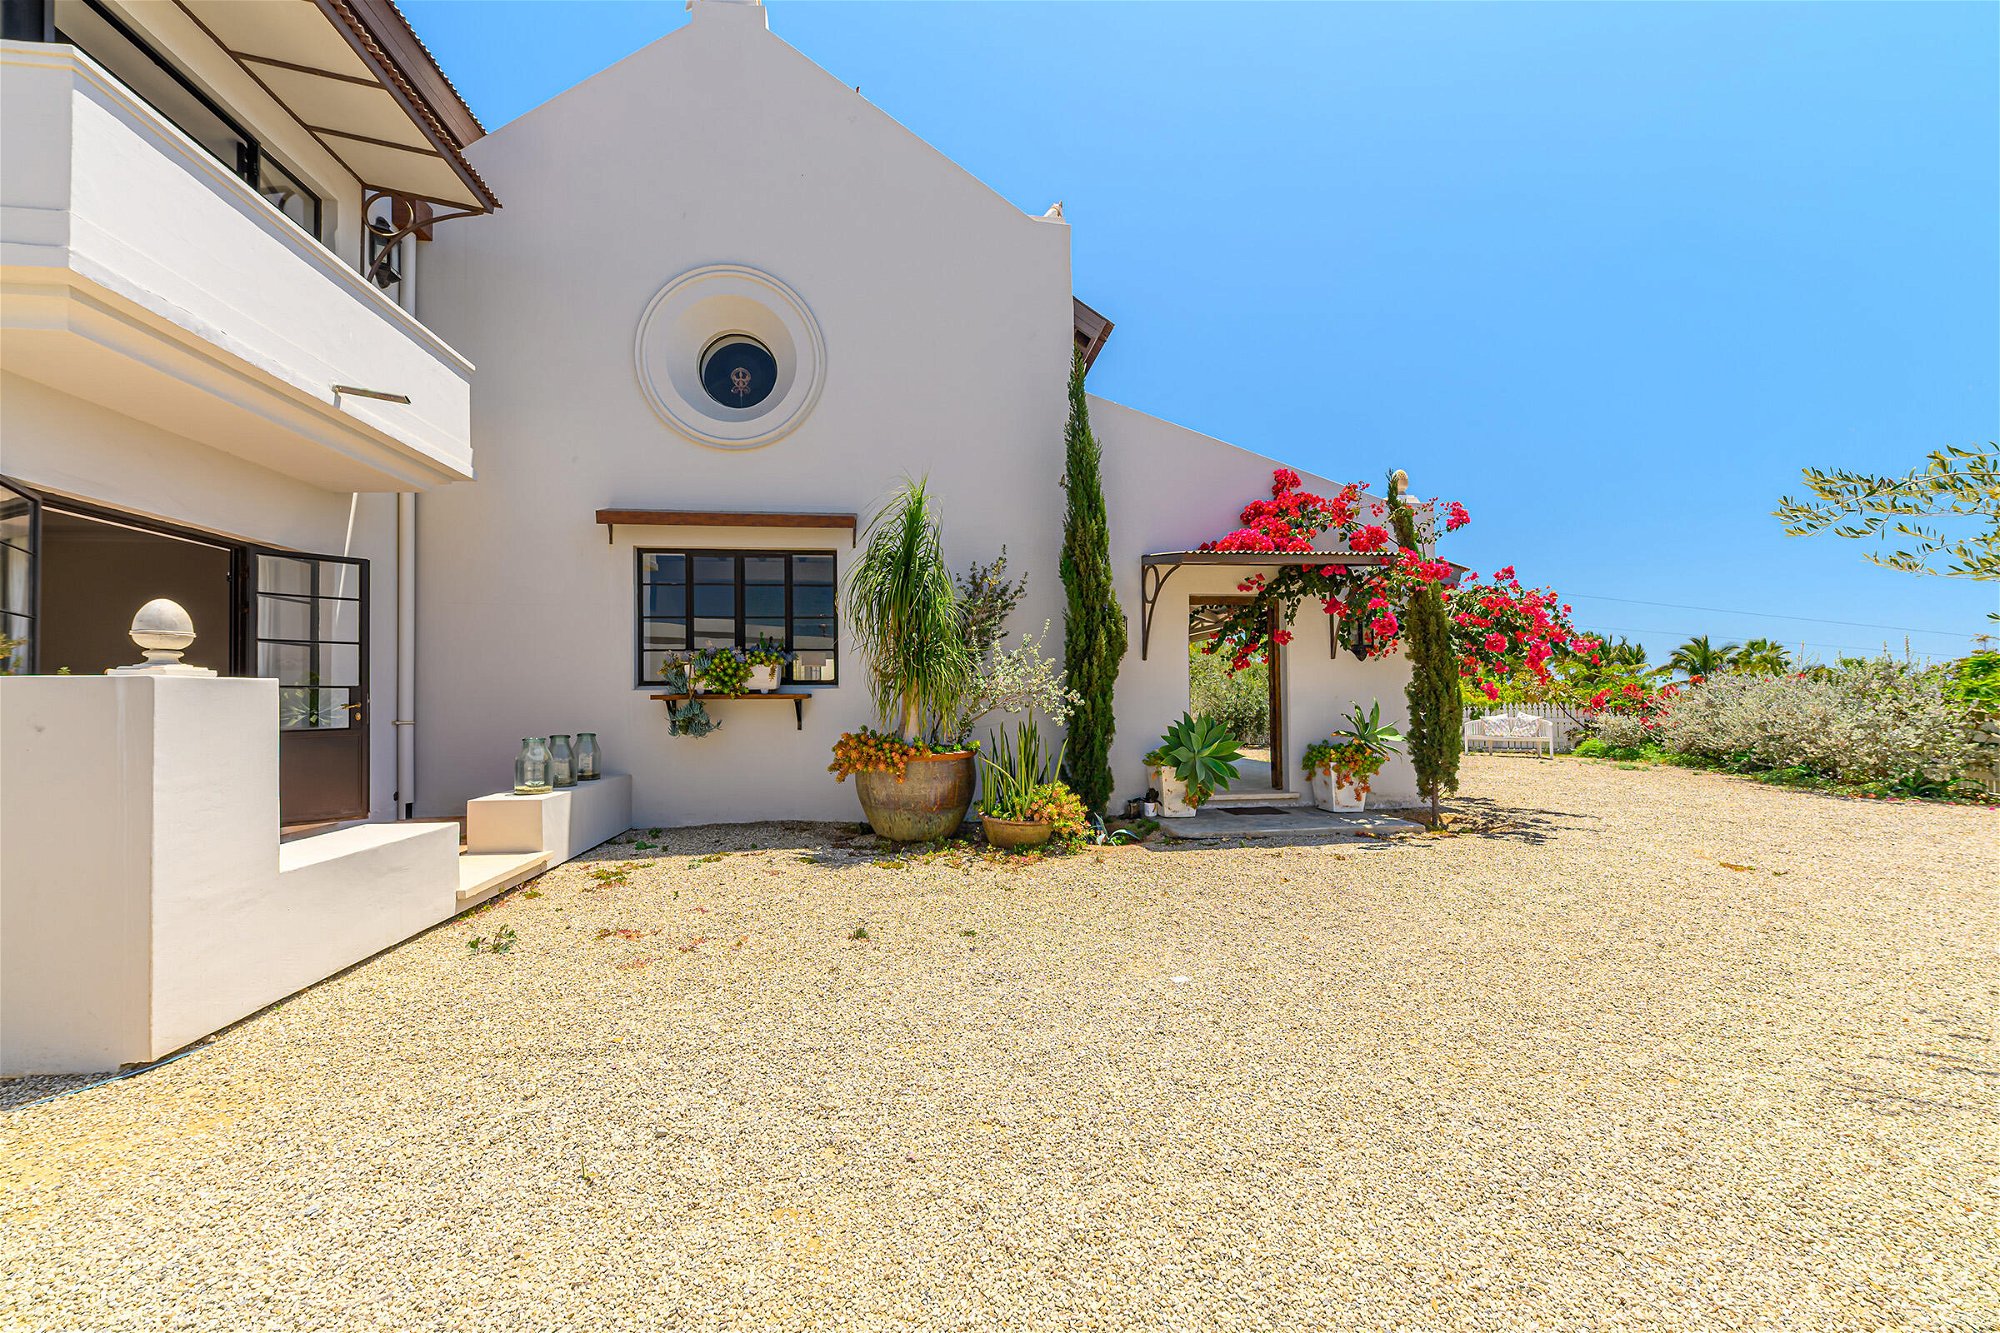 House For Sale in Cabo San Lucas 4248775679